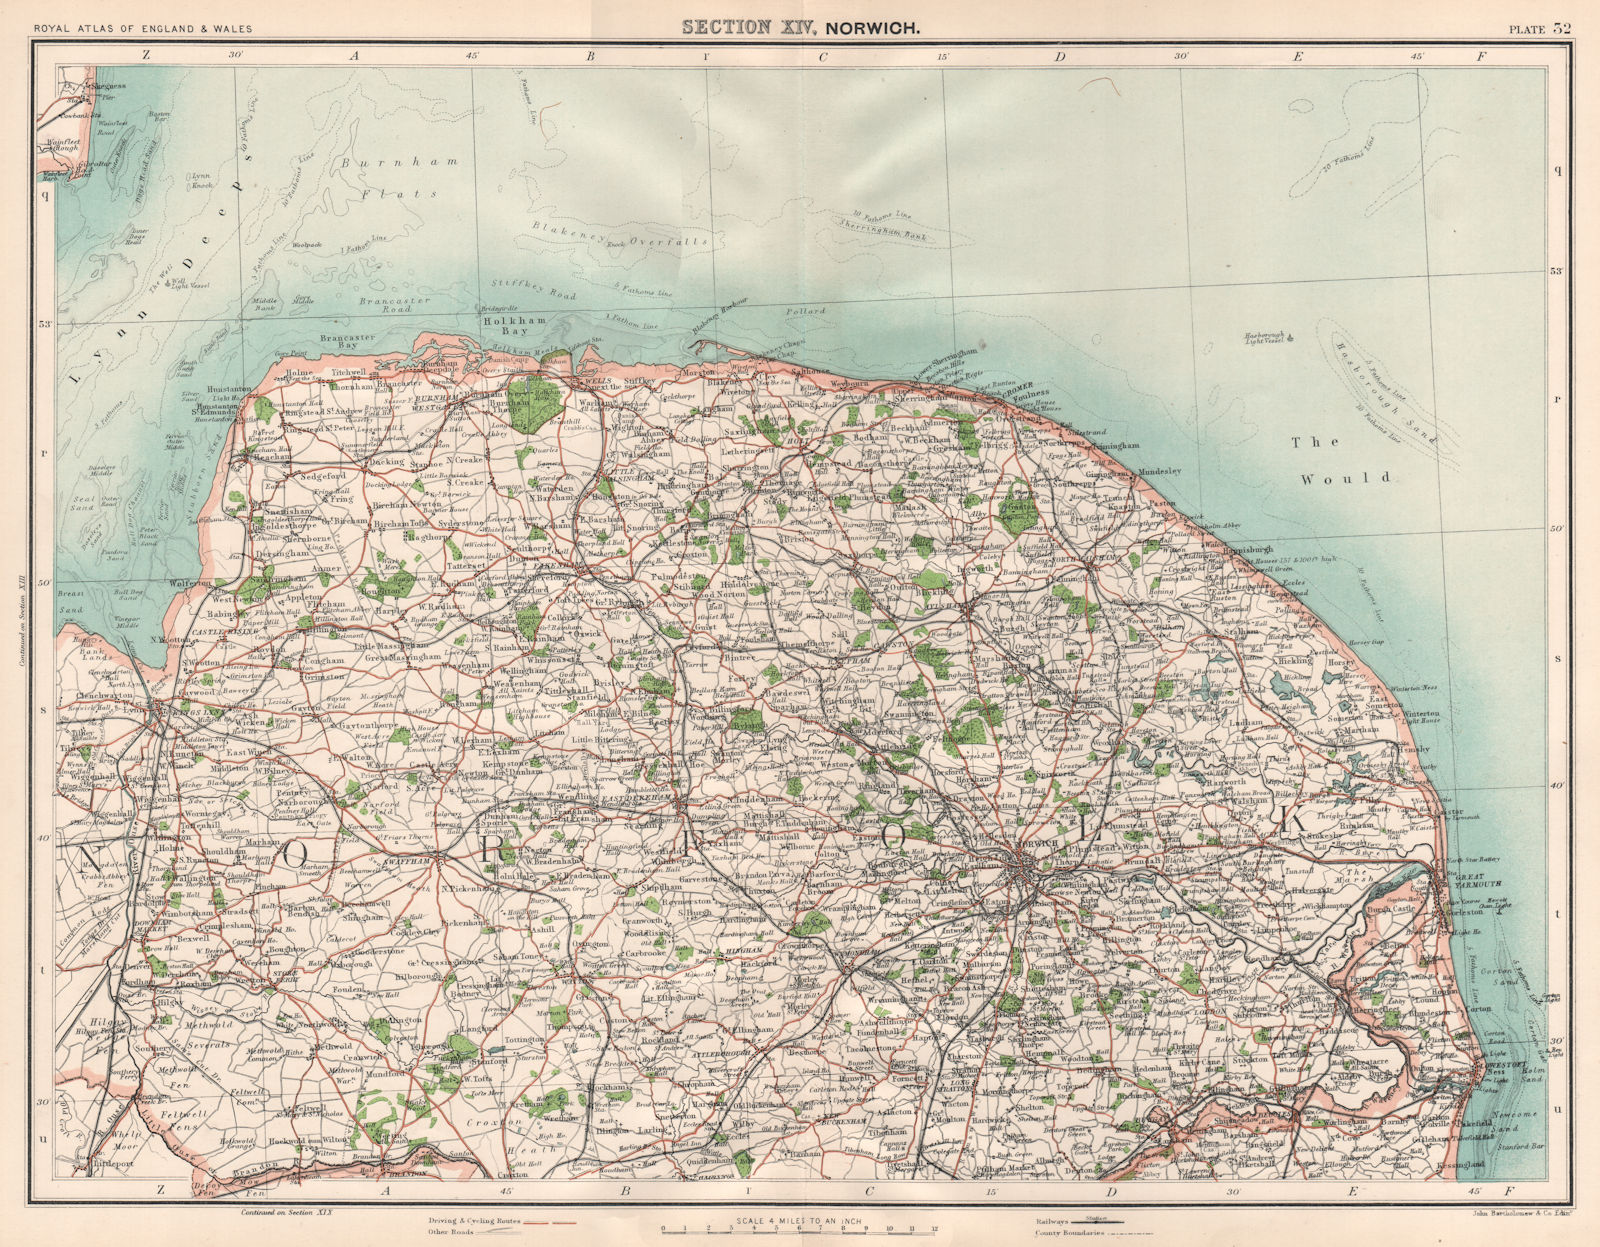 NORFOLK. Coast & Broads. The Wash. Norwich Great Yarmouth Cromer 1898 old map